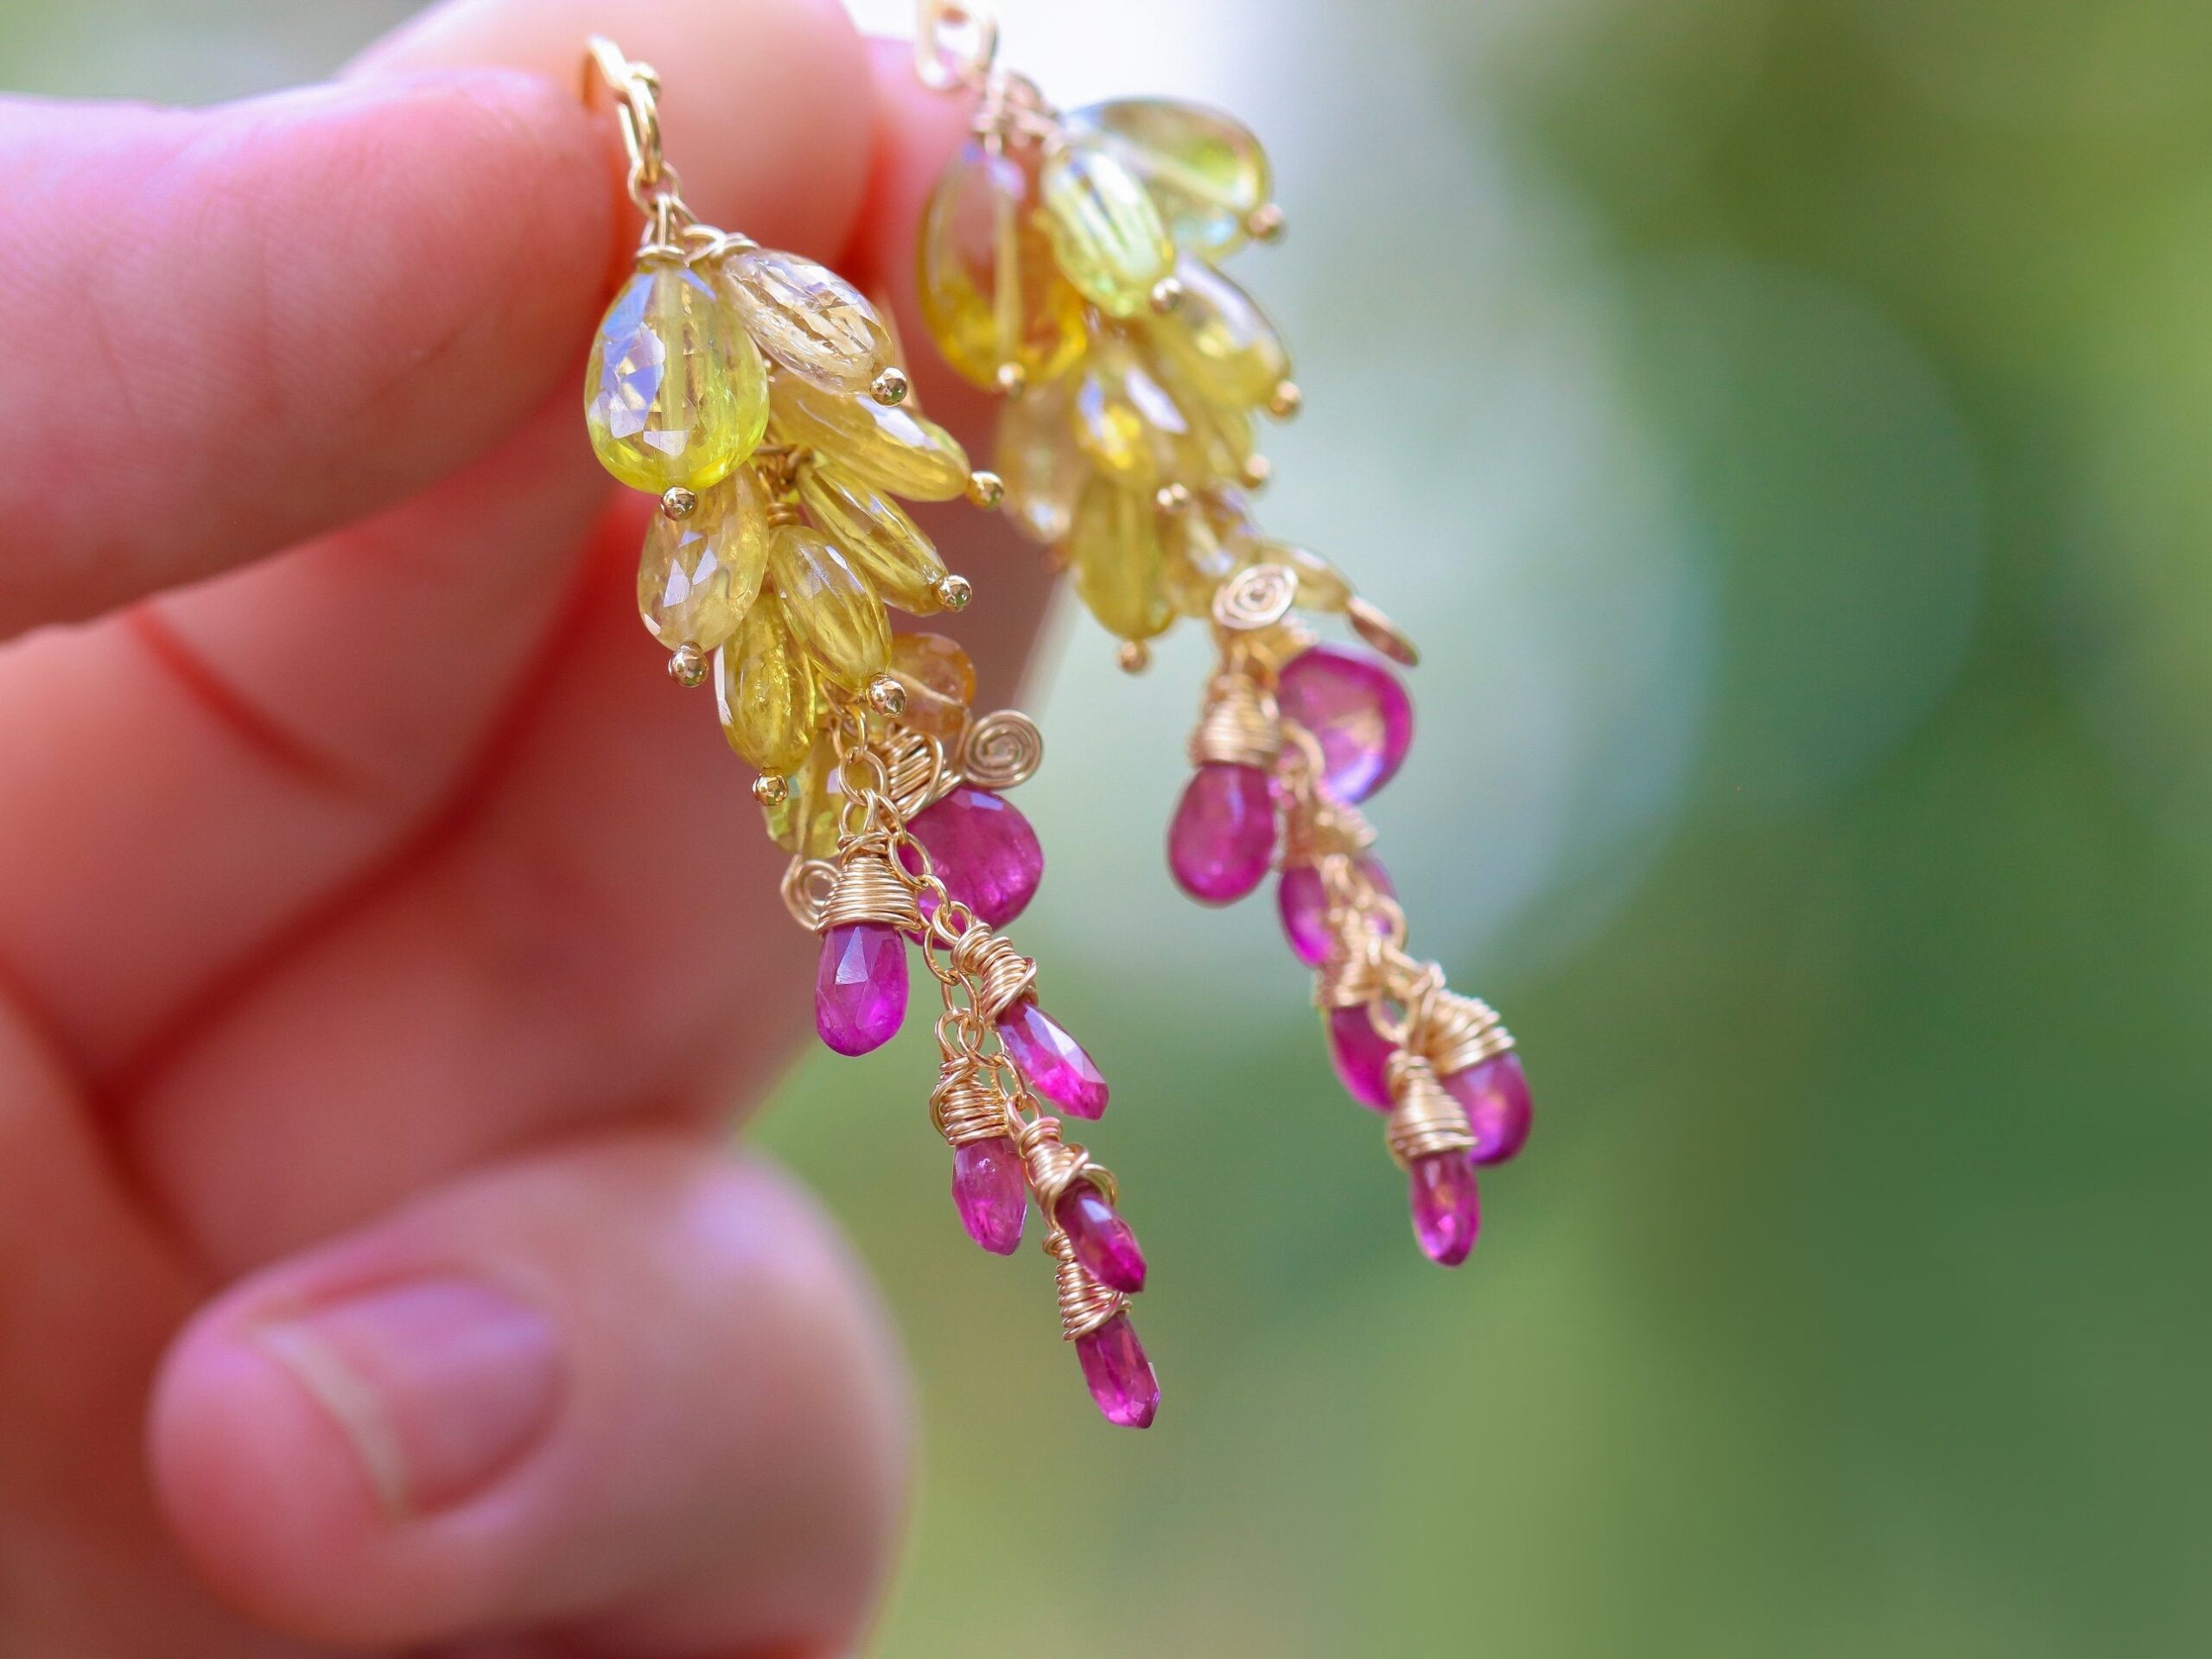 Rubellite Pink and Yellow Tourmalne Earrings, Precious Cluster Earrings in Gold Filled